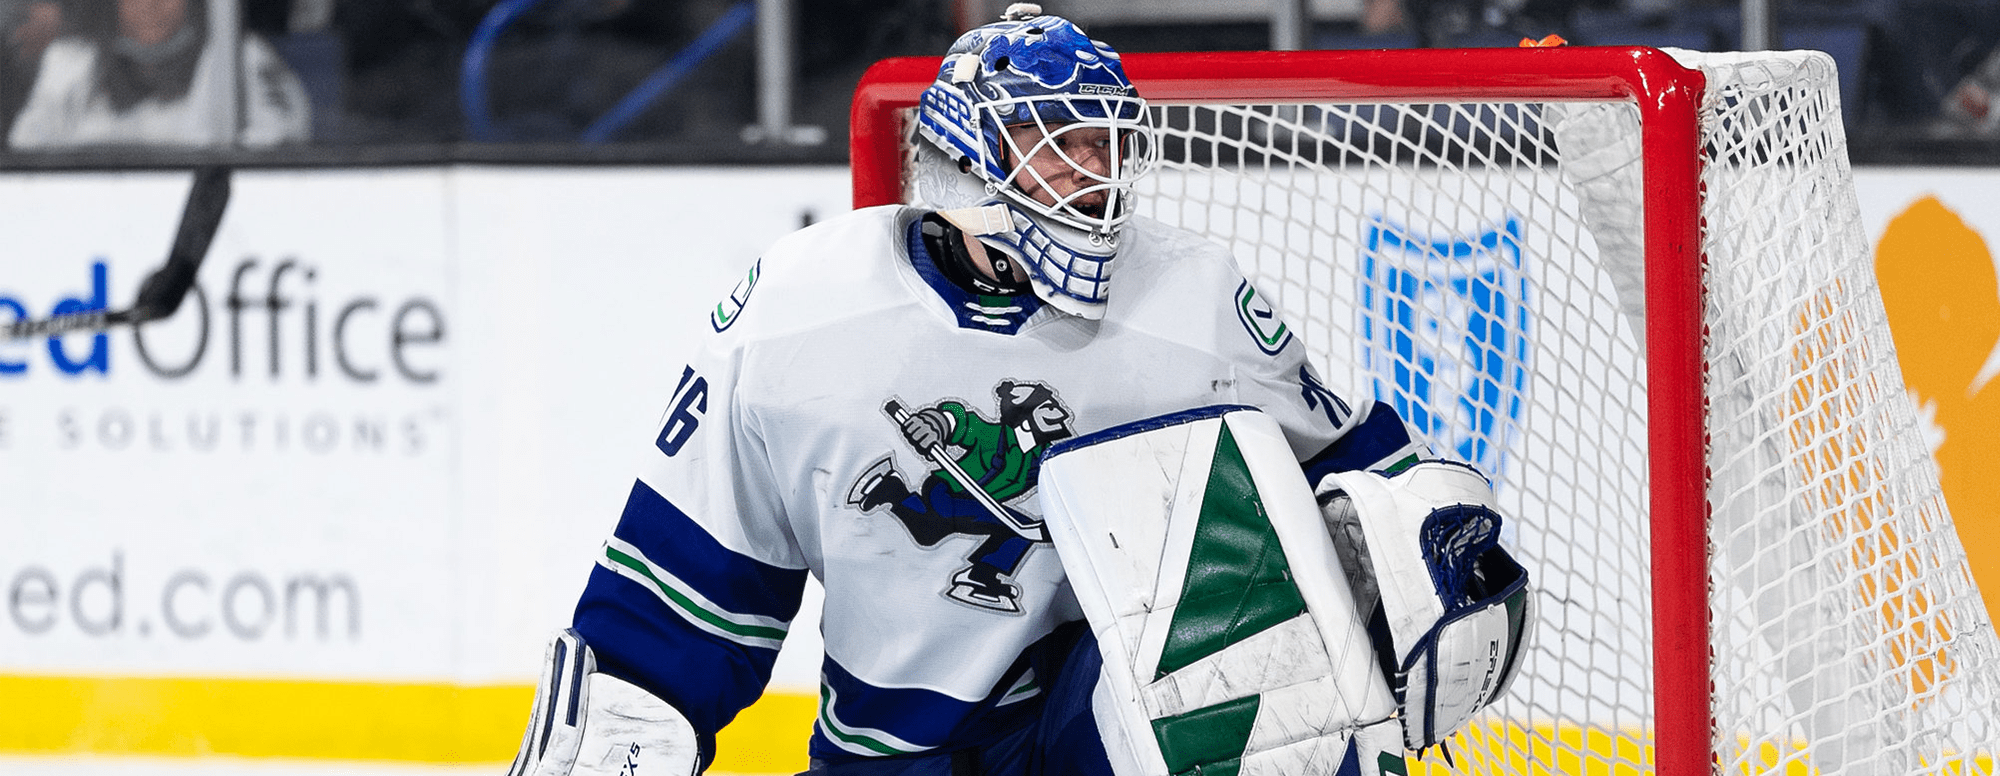 Abbotsford Canucks fall 3-1 to Bakersfield Condors - Mission City